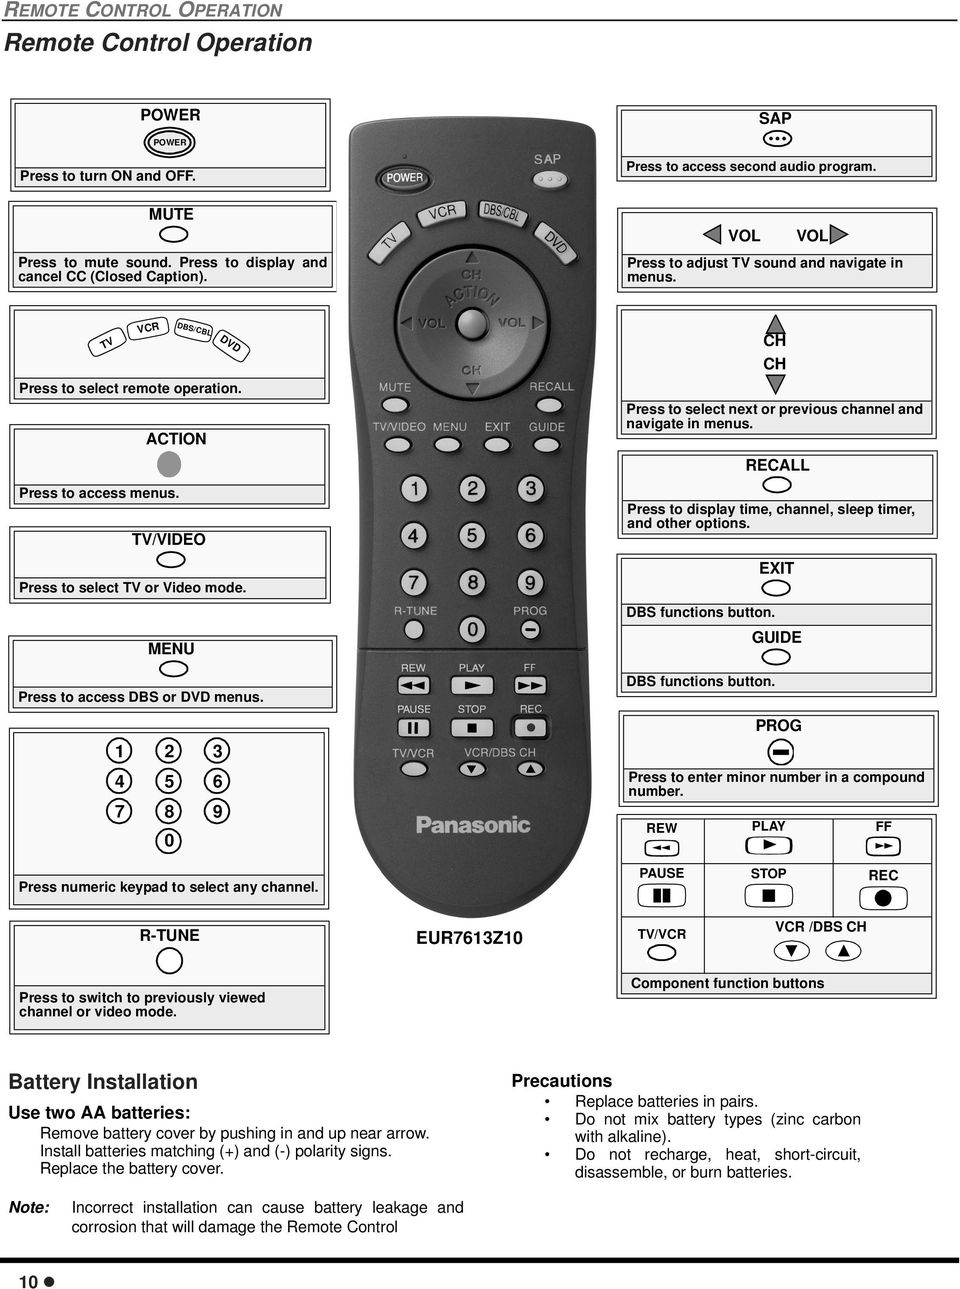 MENU Press to access DBS or DVD mens. 1 2 3 4 5 6 7 8 9 0 Press nmeric keypad to select any channel. CH CH Press to select next or previos channel and navigate in mens. DBS fnctions btton.